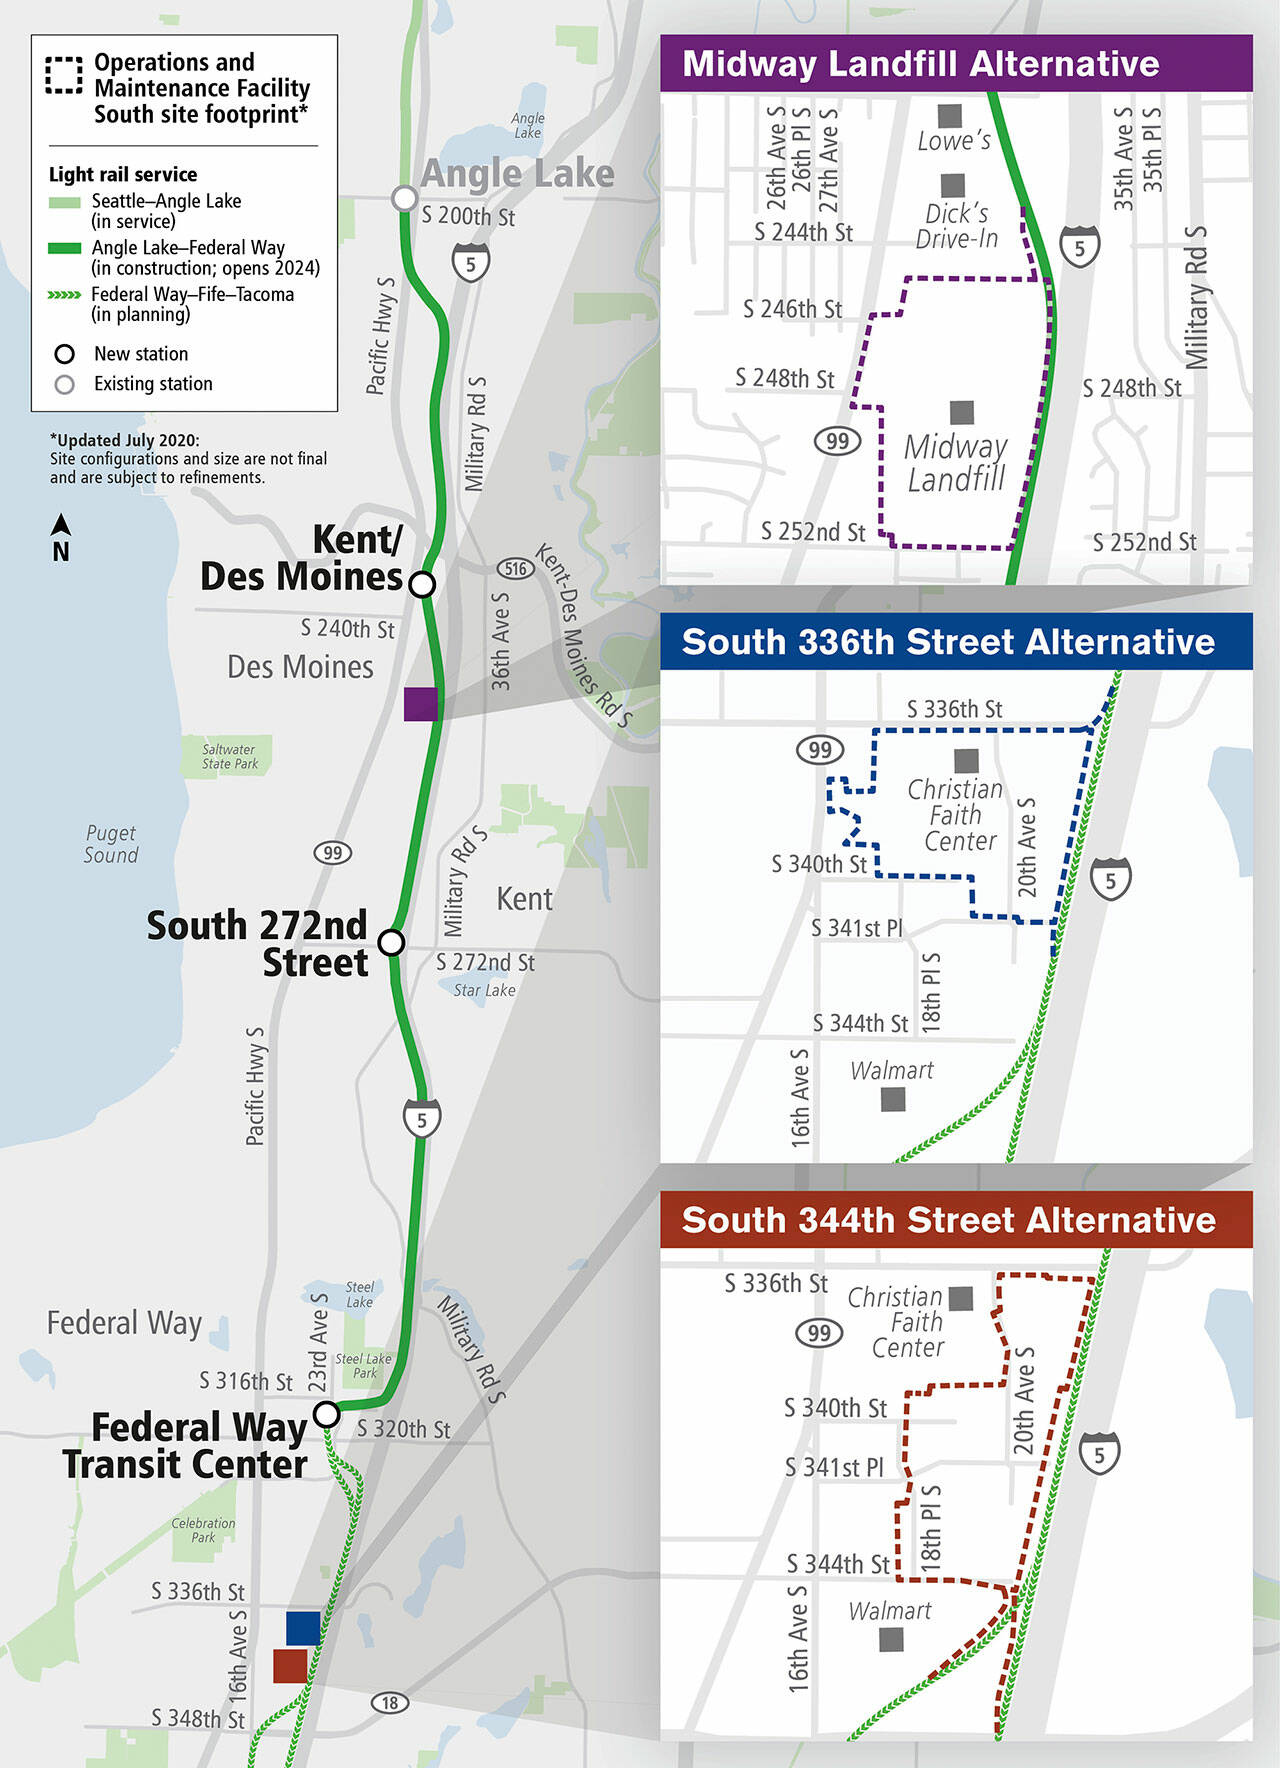 The site in Kent and two sites in Federal Way under consideration by Sound Transit to build a new Operations and Maintenance Facility for light rail vehicles. COURTESY GRAPHIC, Sound Transit